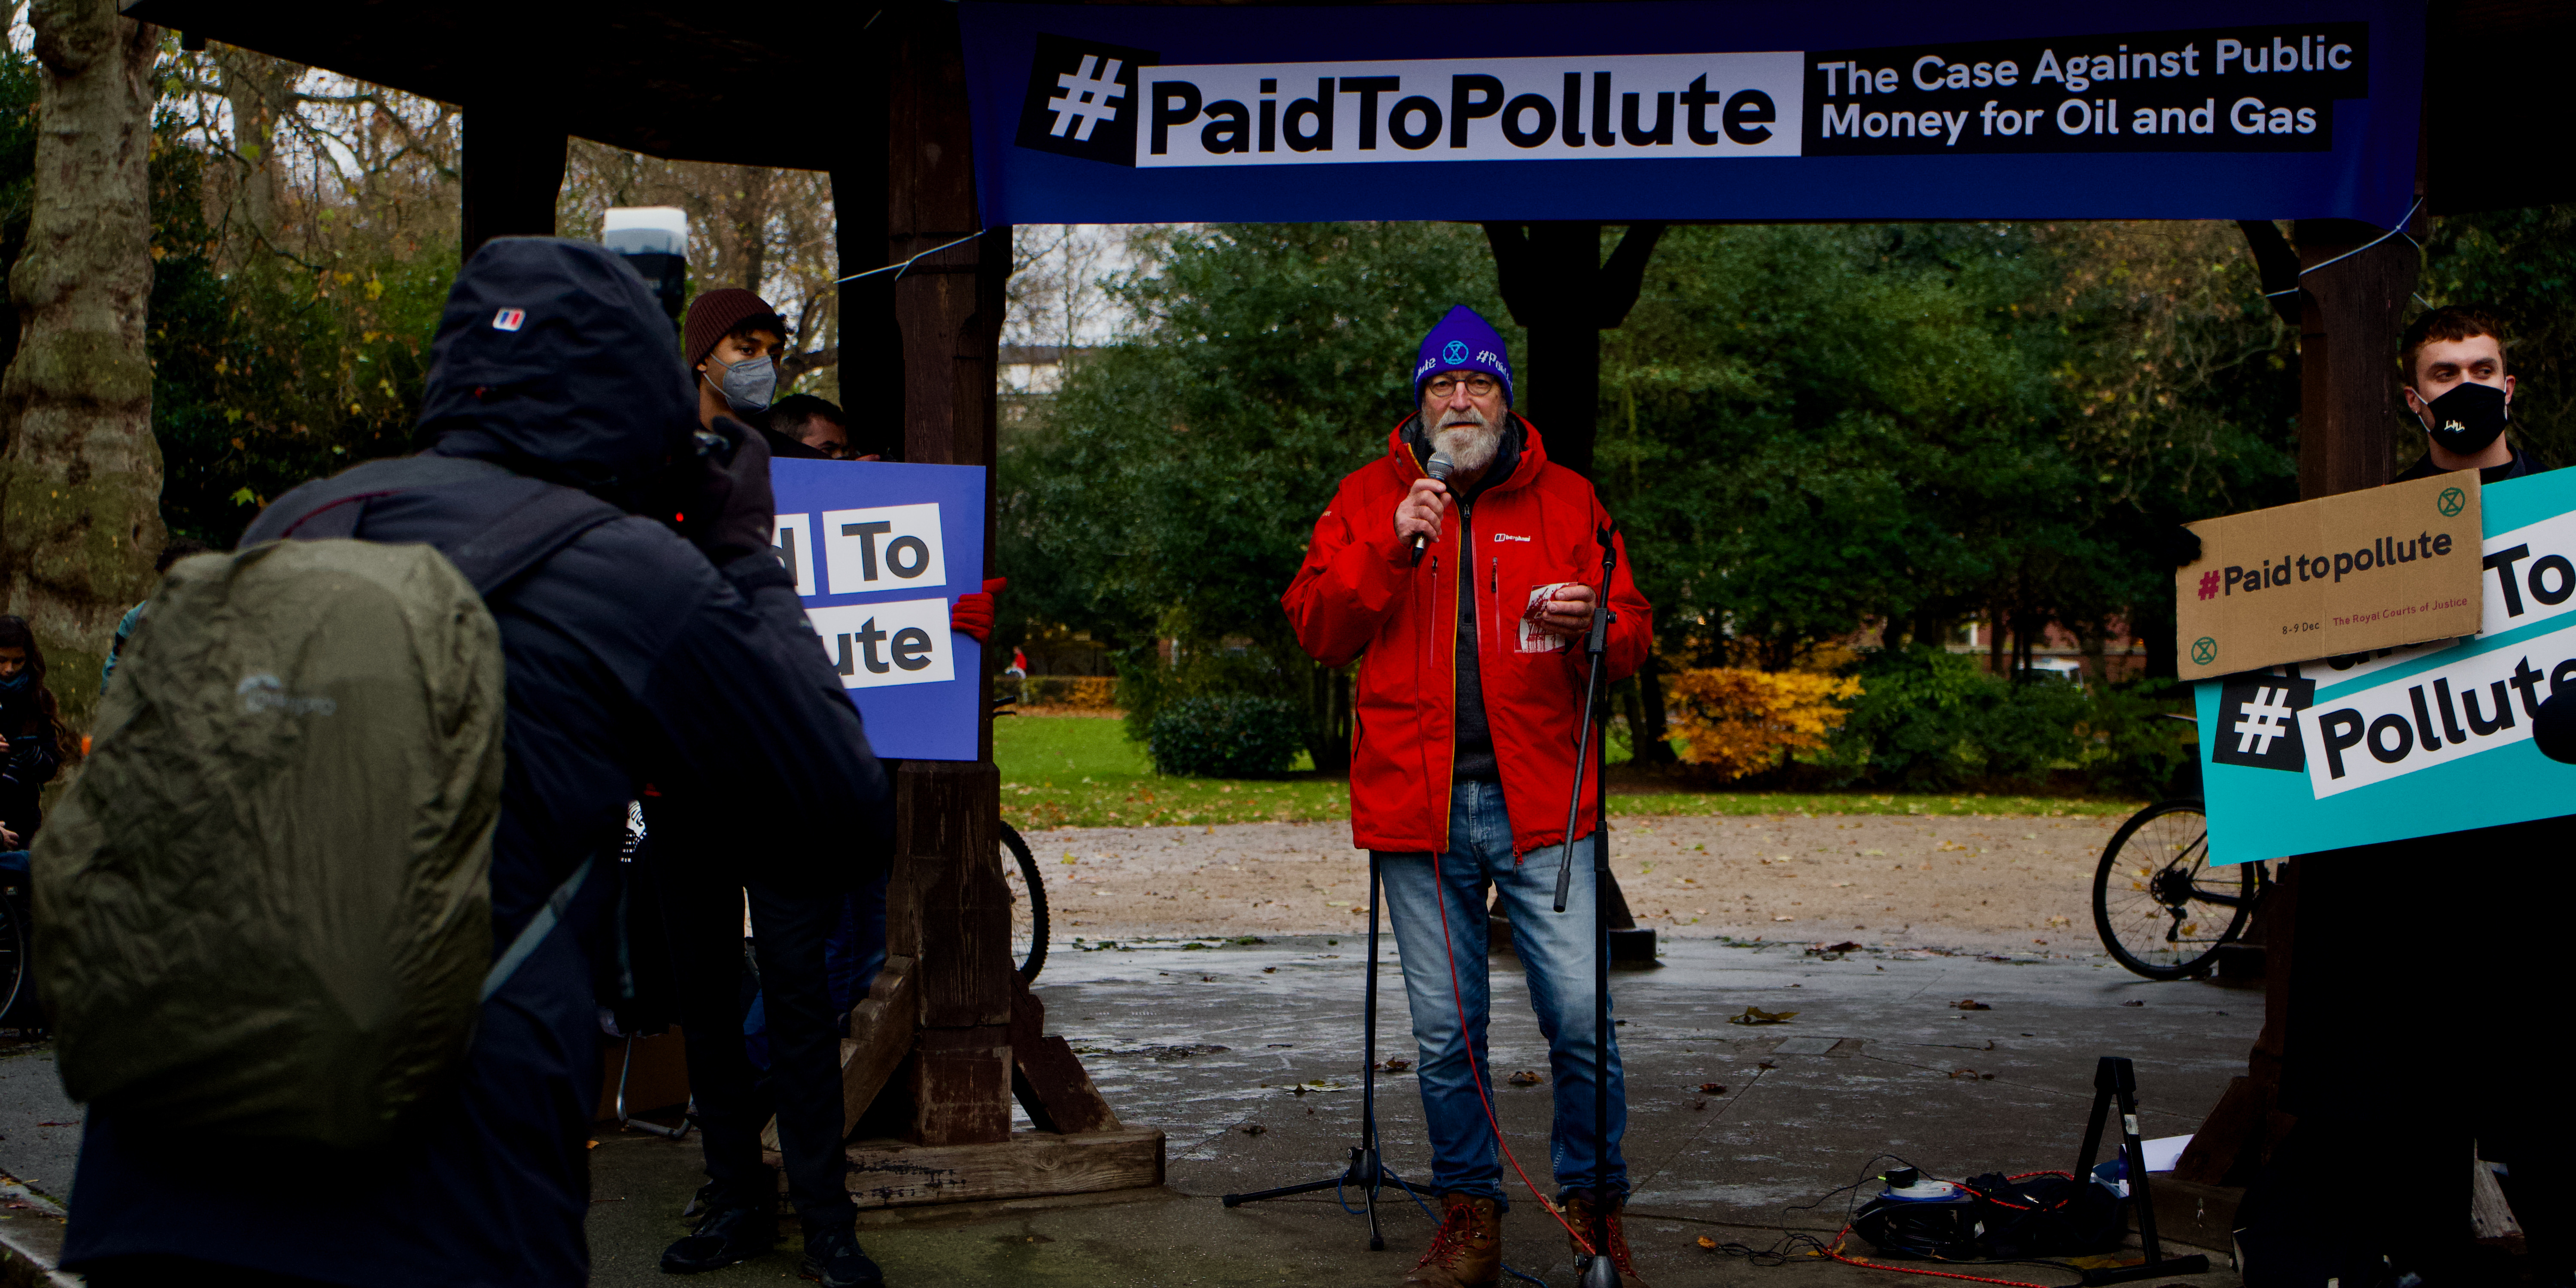 Image shows a speaker addressing a crowd in front of a banner reading "Paid to Pollute".